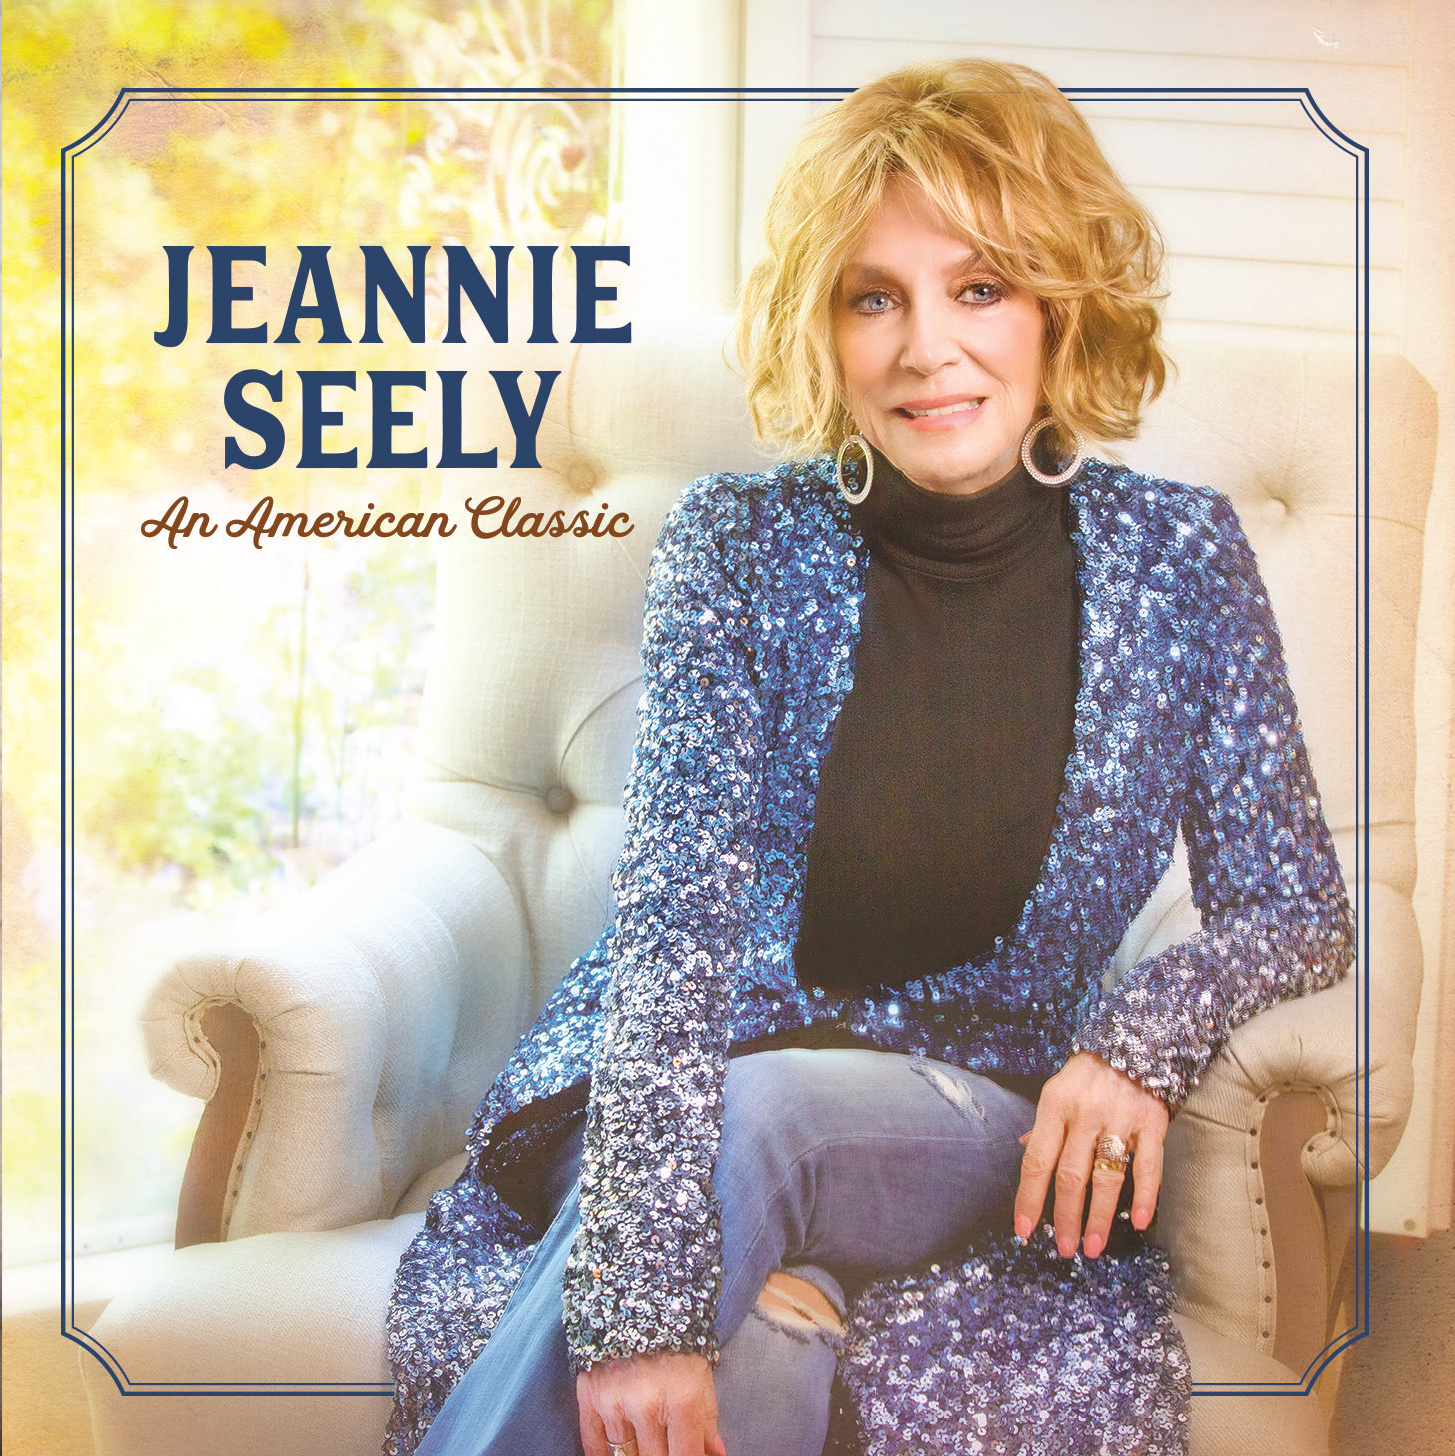 wildoneforever.com, wildoneforever, wildone forever, Classic Country Trailblazer, Jeannie Seely Releases 'An American Classic' Today, Entertainment, Lifestyle